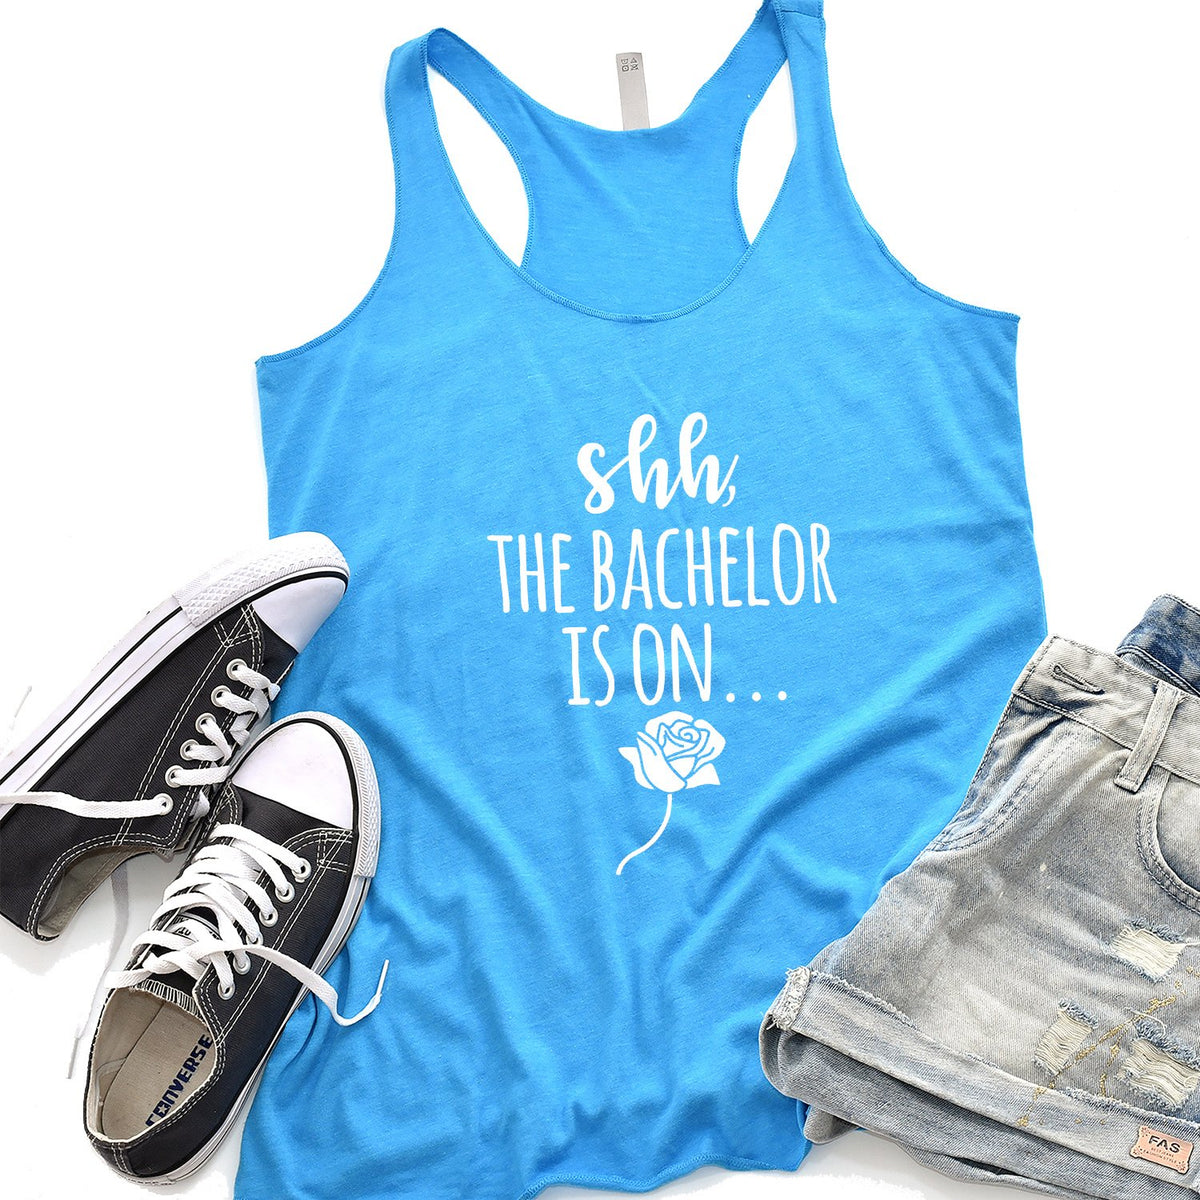 Shh The Bachelor is On - Tank Top Racerback